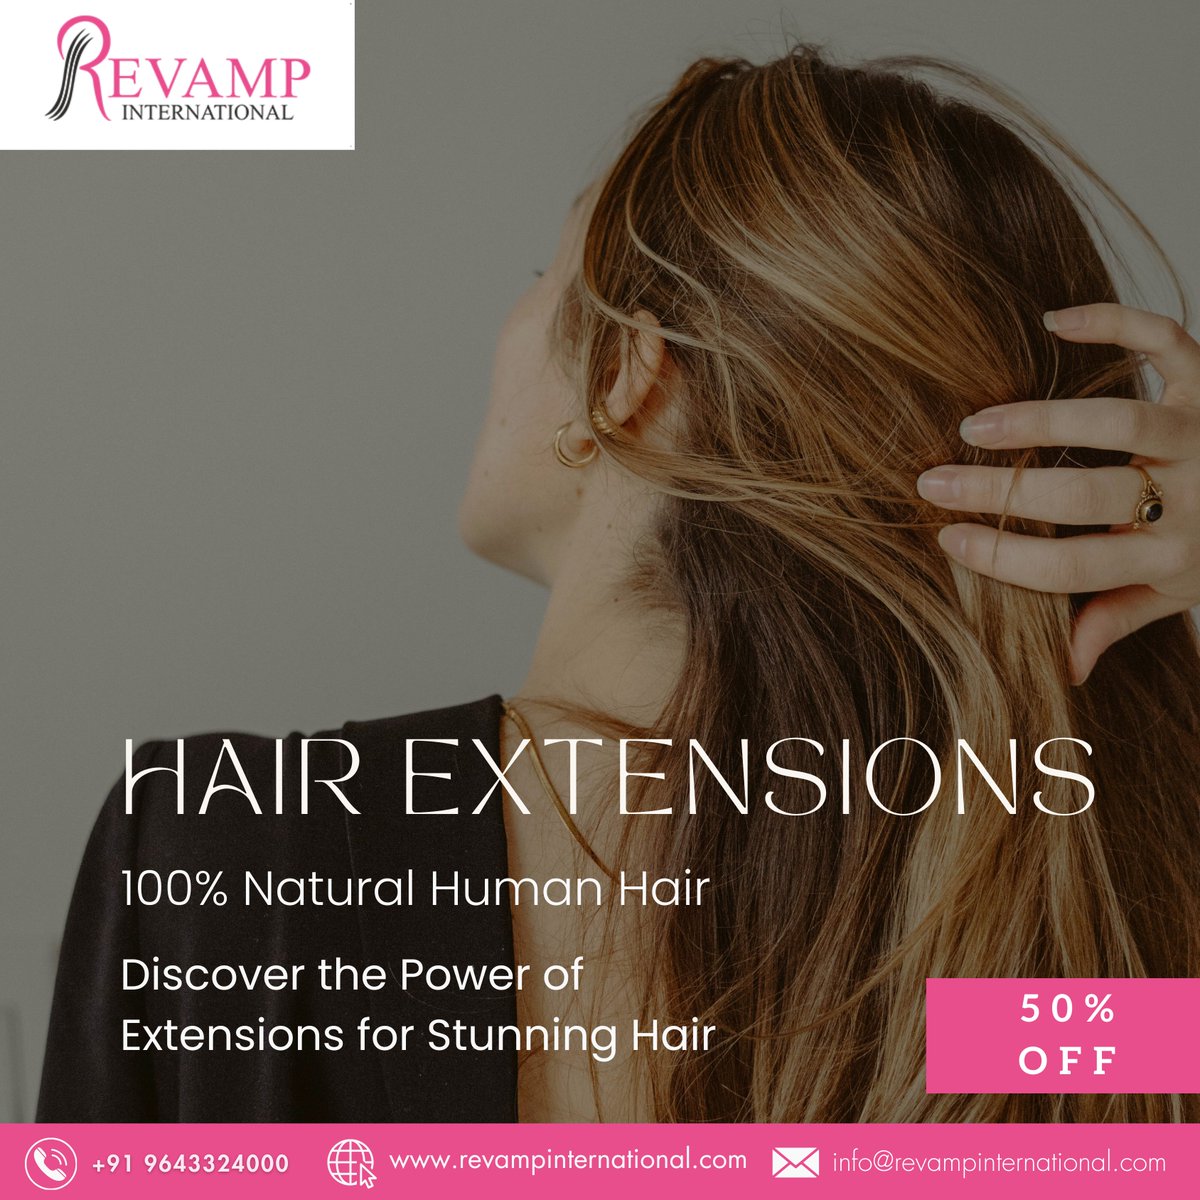 With our quality natural human hair extensions, discover the key to stunning hair changes!

📷 Our selection includes hairstyles that are smooth and voluminous as well as everything in between.

#NaturalHair #RevampInternational #HairExtensions #TransformWithus #GlamGameStrong